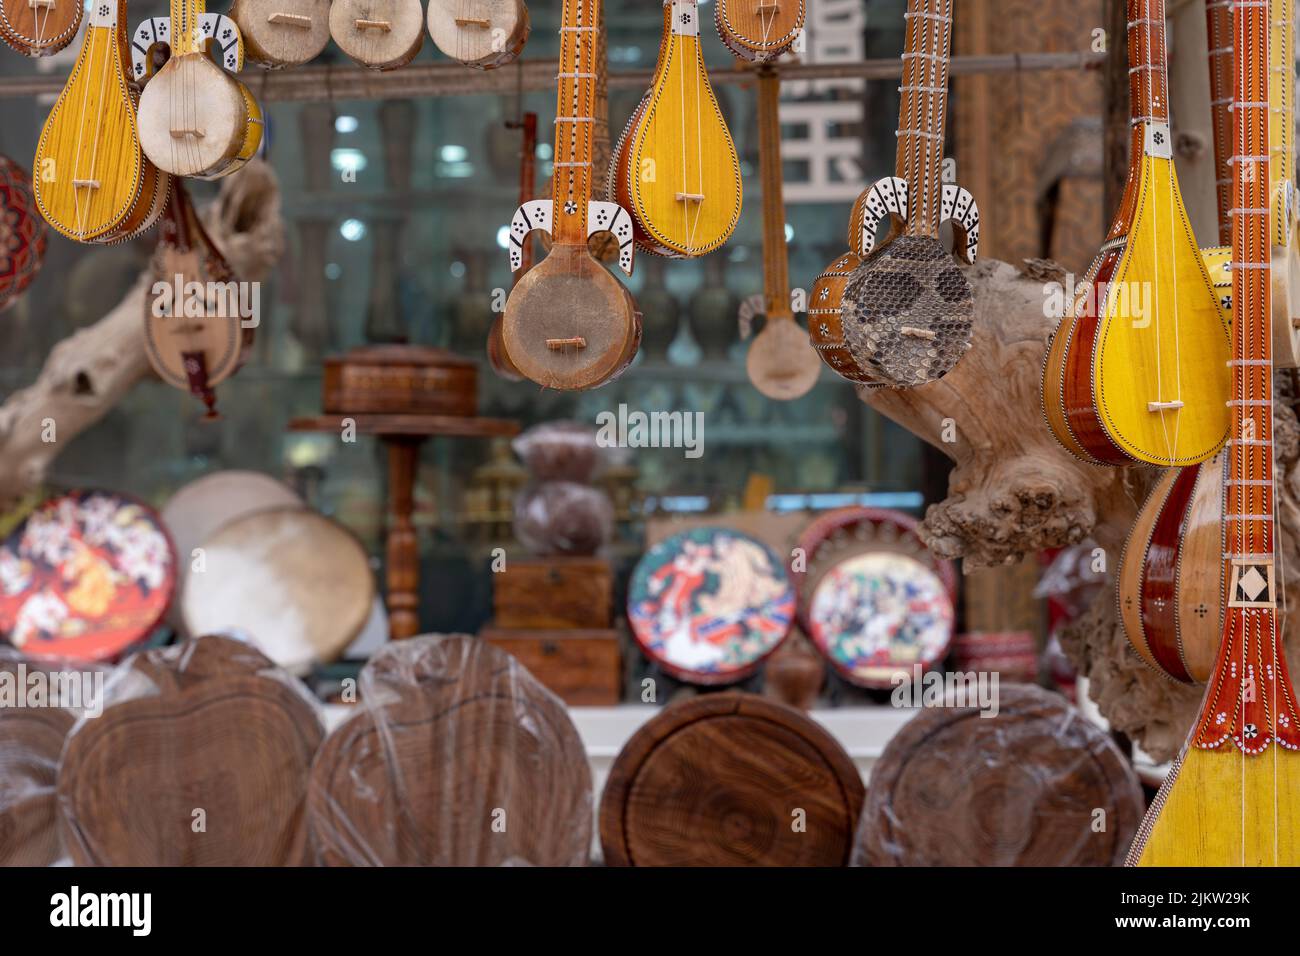 A beautiful shot of string instruments hanging in a music store Stock Photo